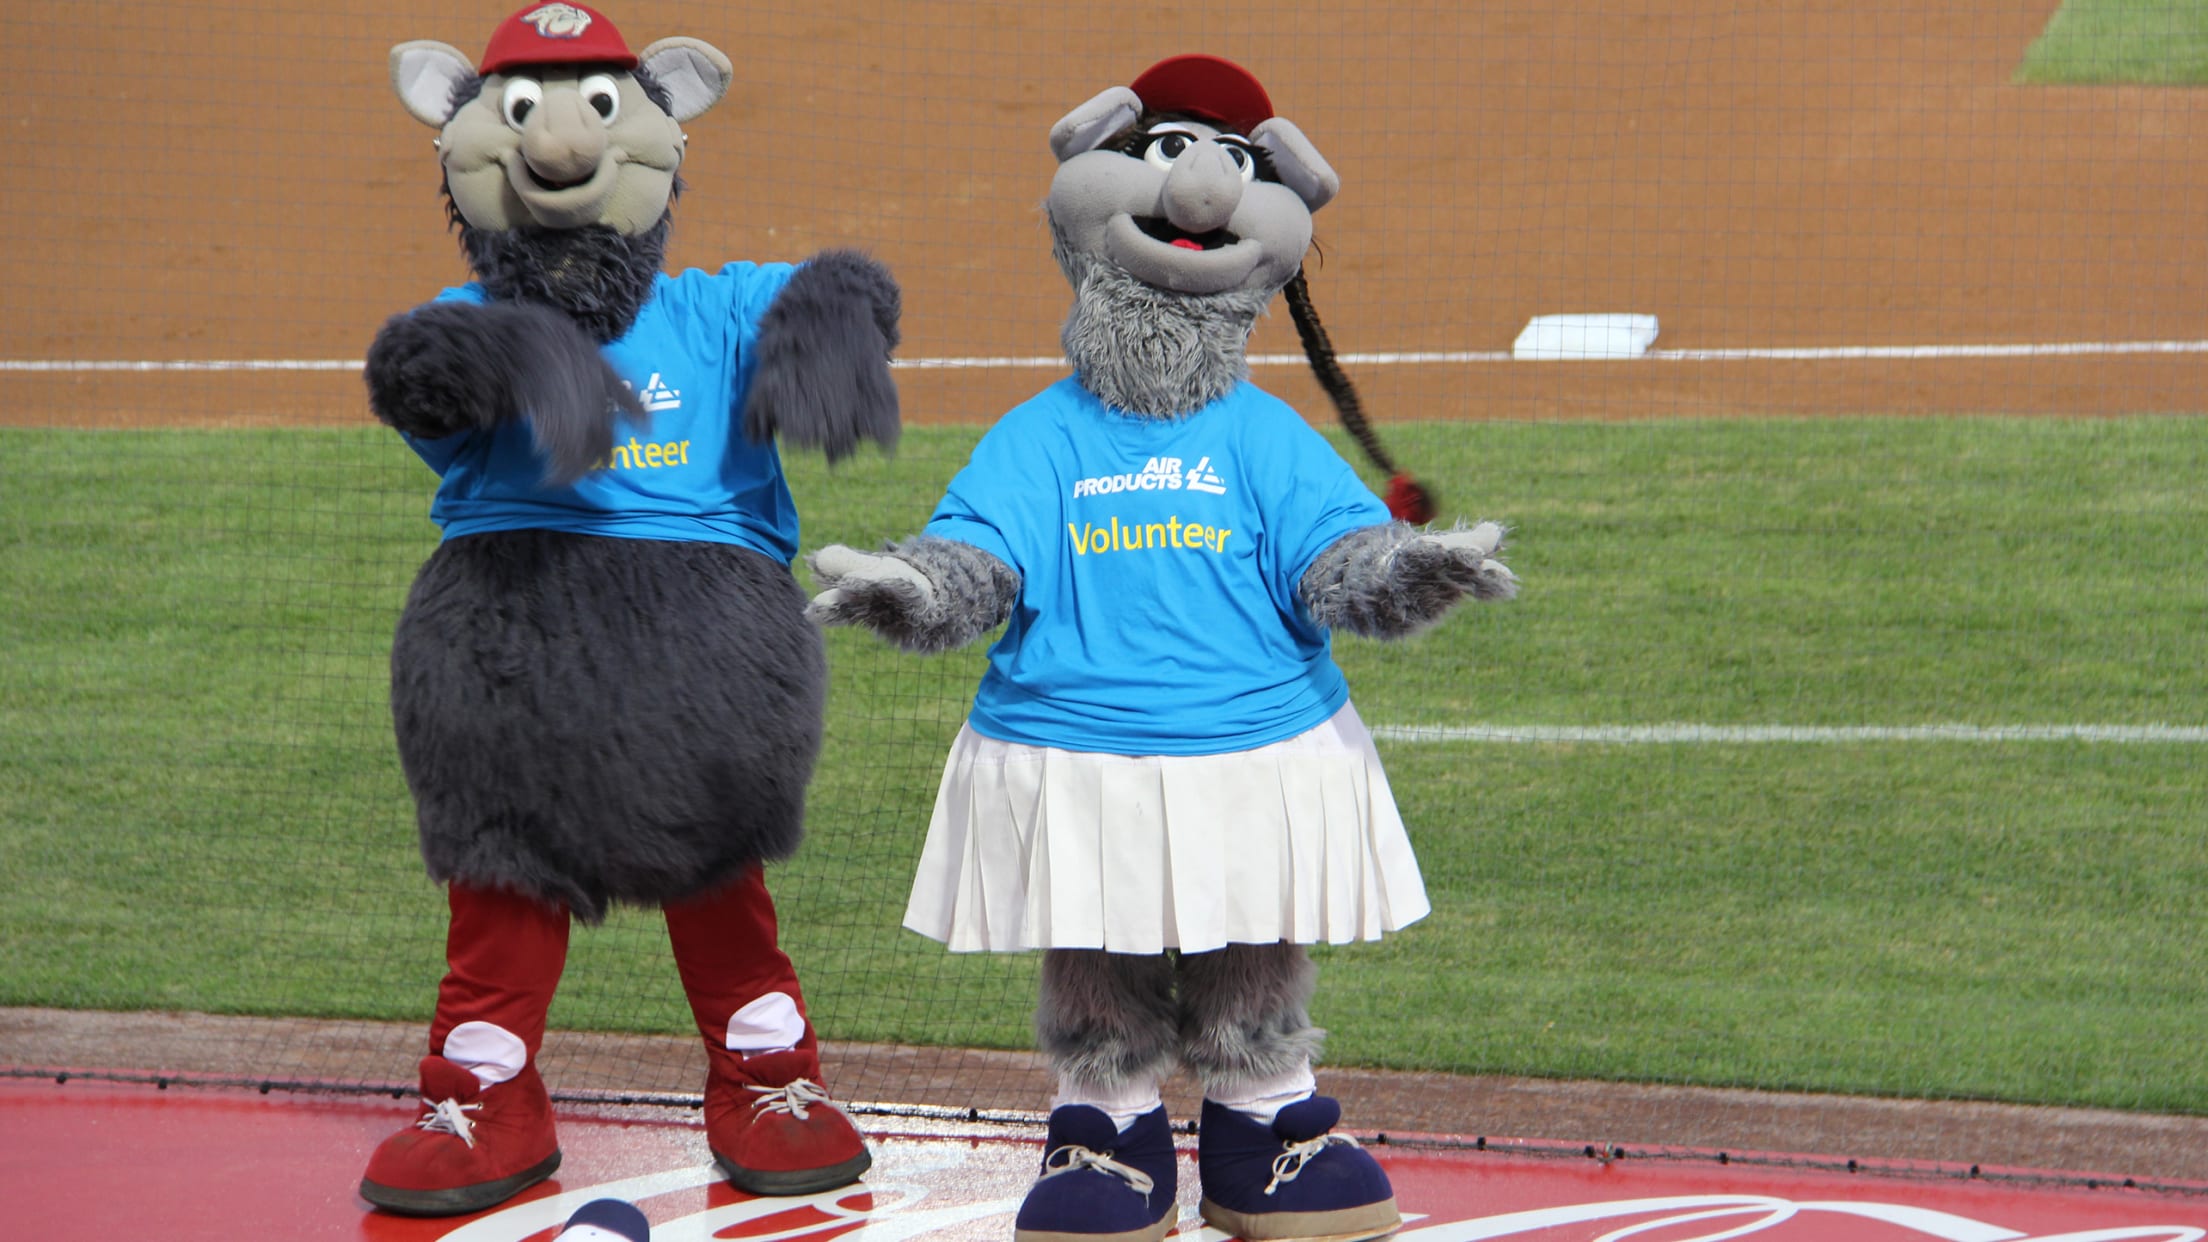 How the Lehigh Valley IronPigs Got Their Name